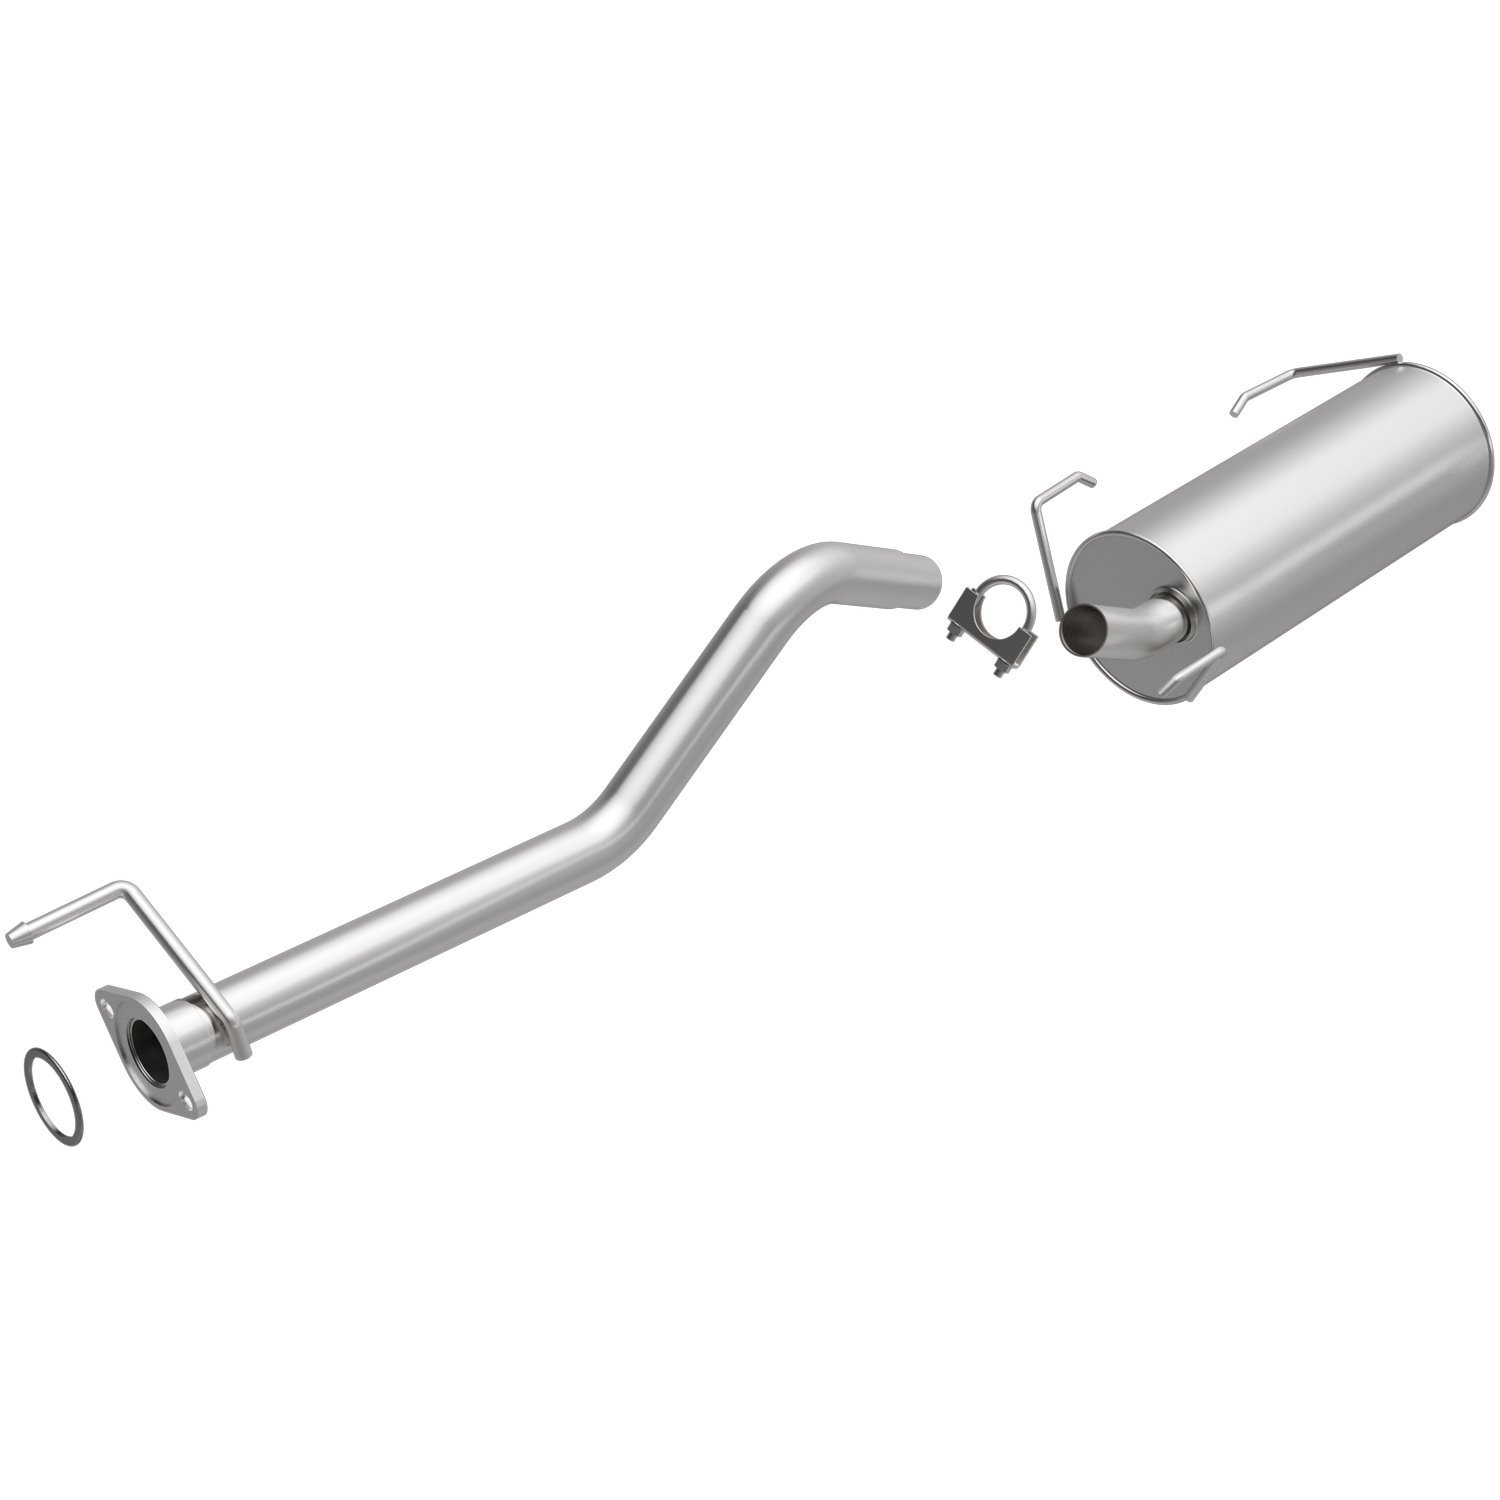 Direct-Fit Exhaust Kit, 1991-1995 Toyota Previa 2.4L